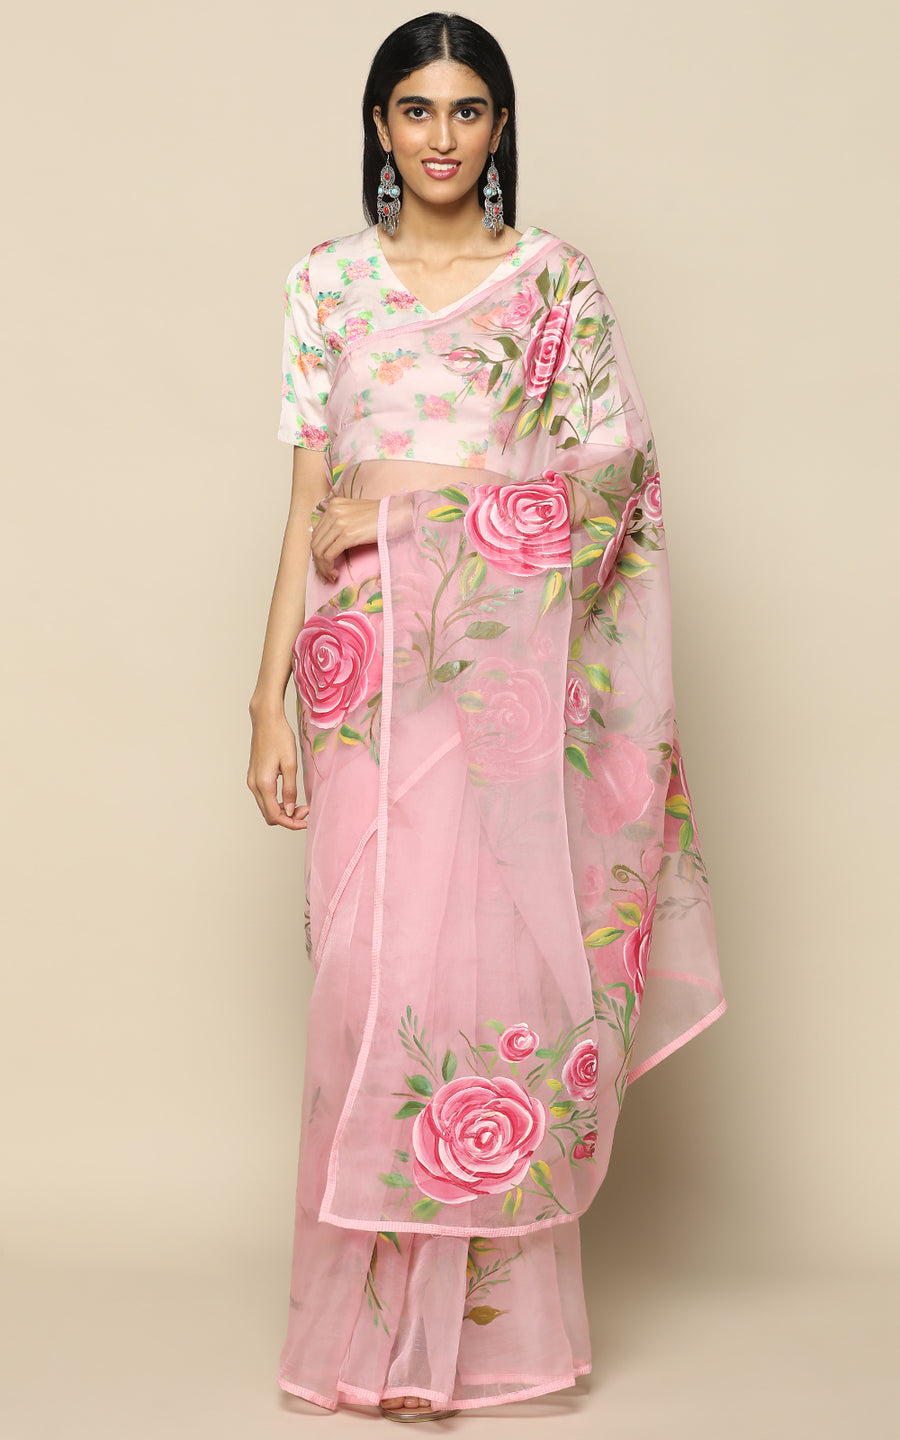 BABY PINK ORGANZA SILK SAREE WITH LIGHT PINK HANDPAINTED FLOWERS